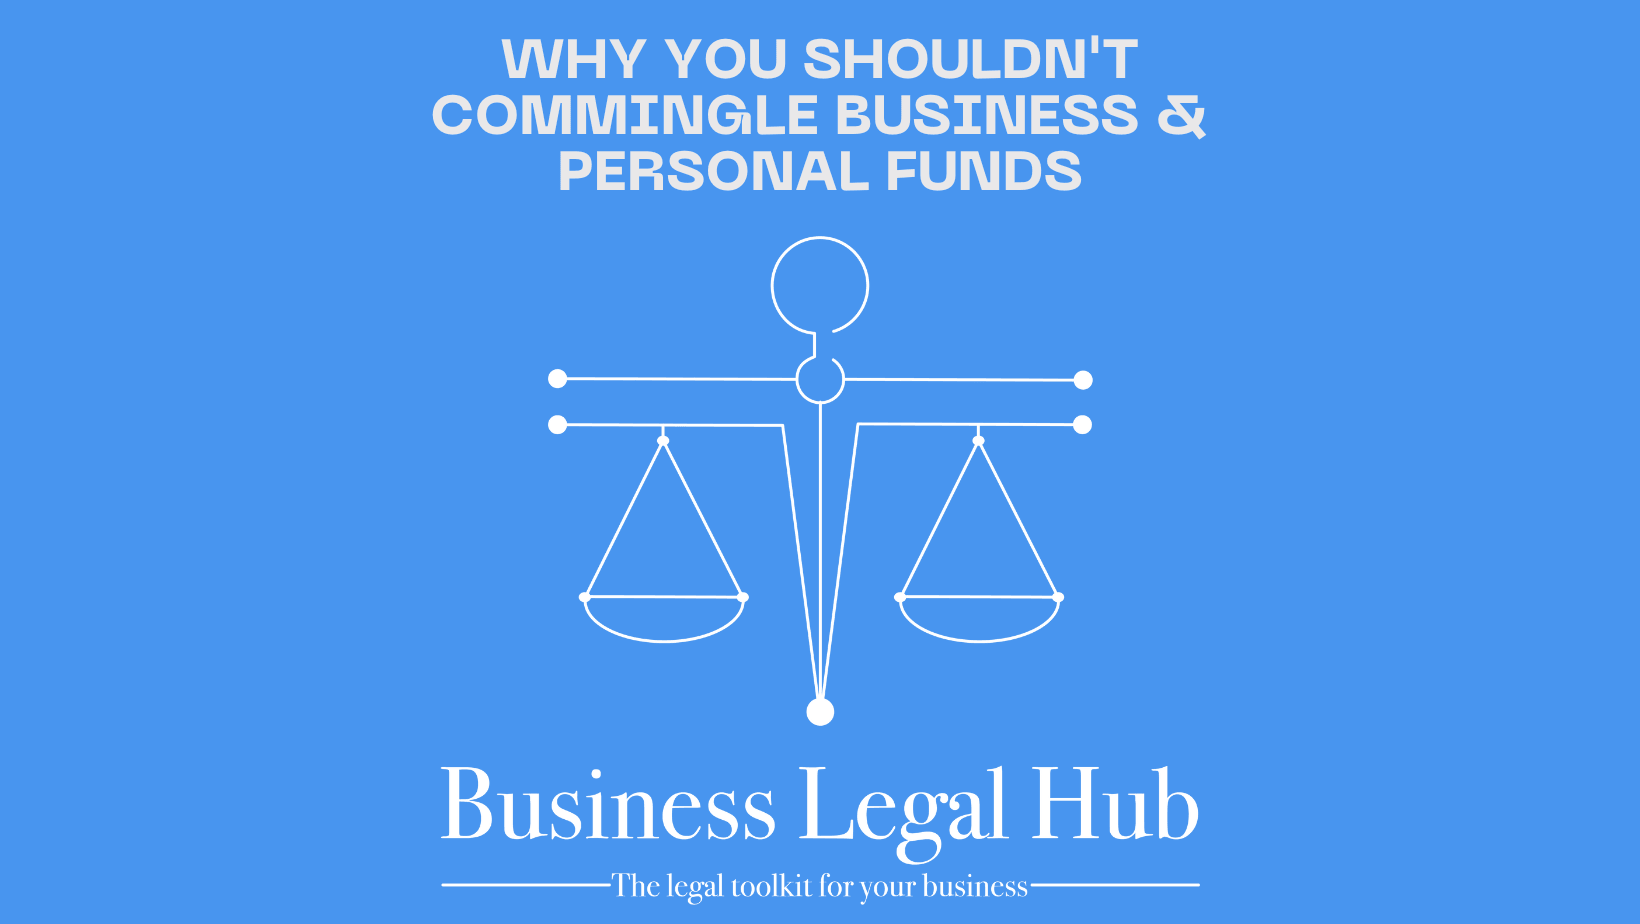 Why You Shouldn't Commingle Business & Personal Funds - Business Legal Hub